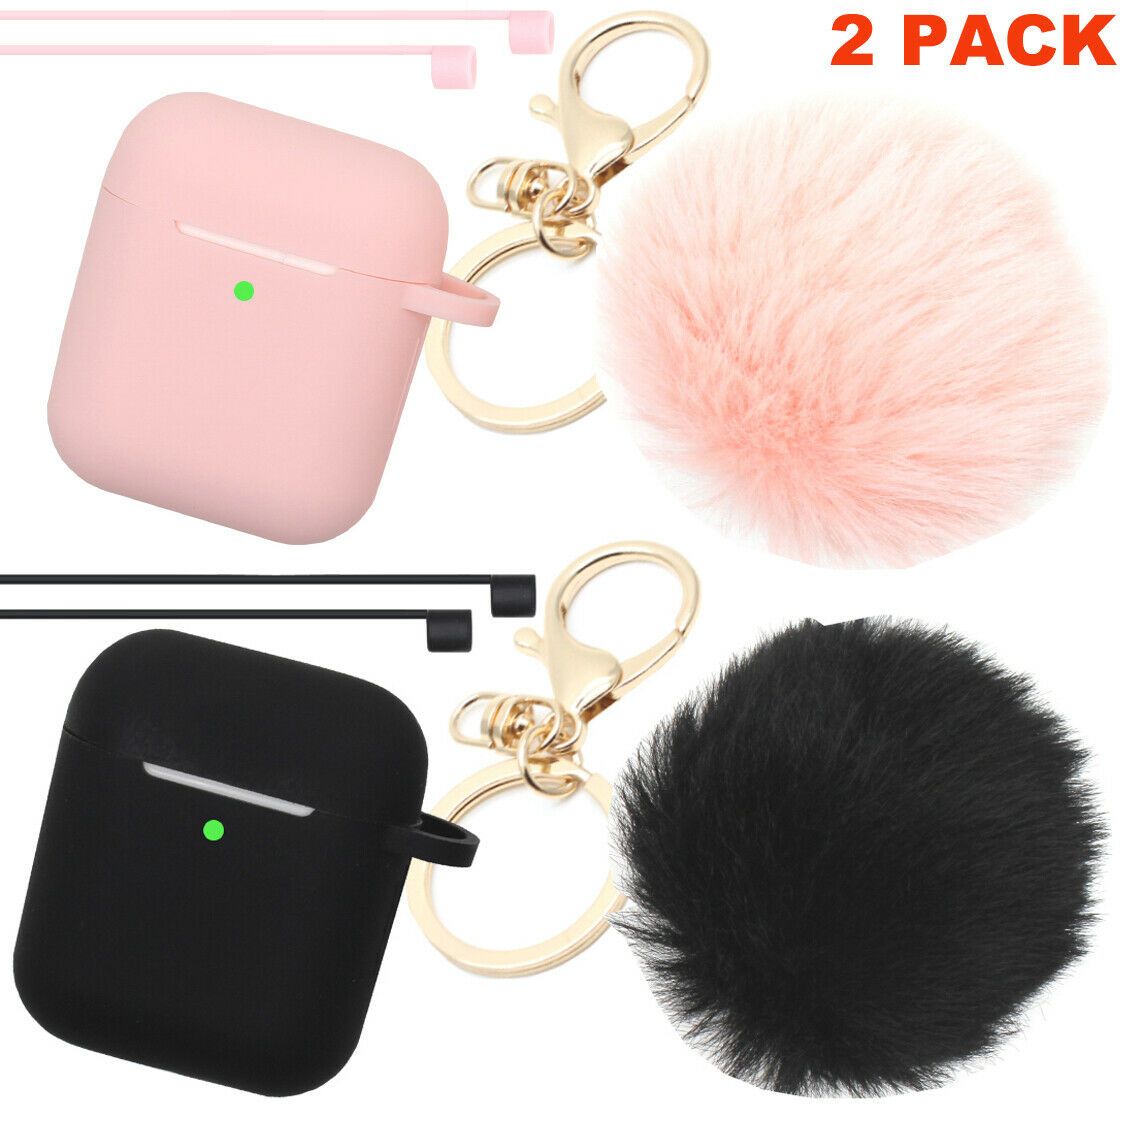 Cute Airpods Silicone Case Cover w/Fur Ball Keychain Strap for Apple Airpods 1/2 ervin.accessories Pink+Black (2 Pack) 